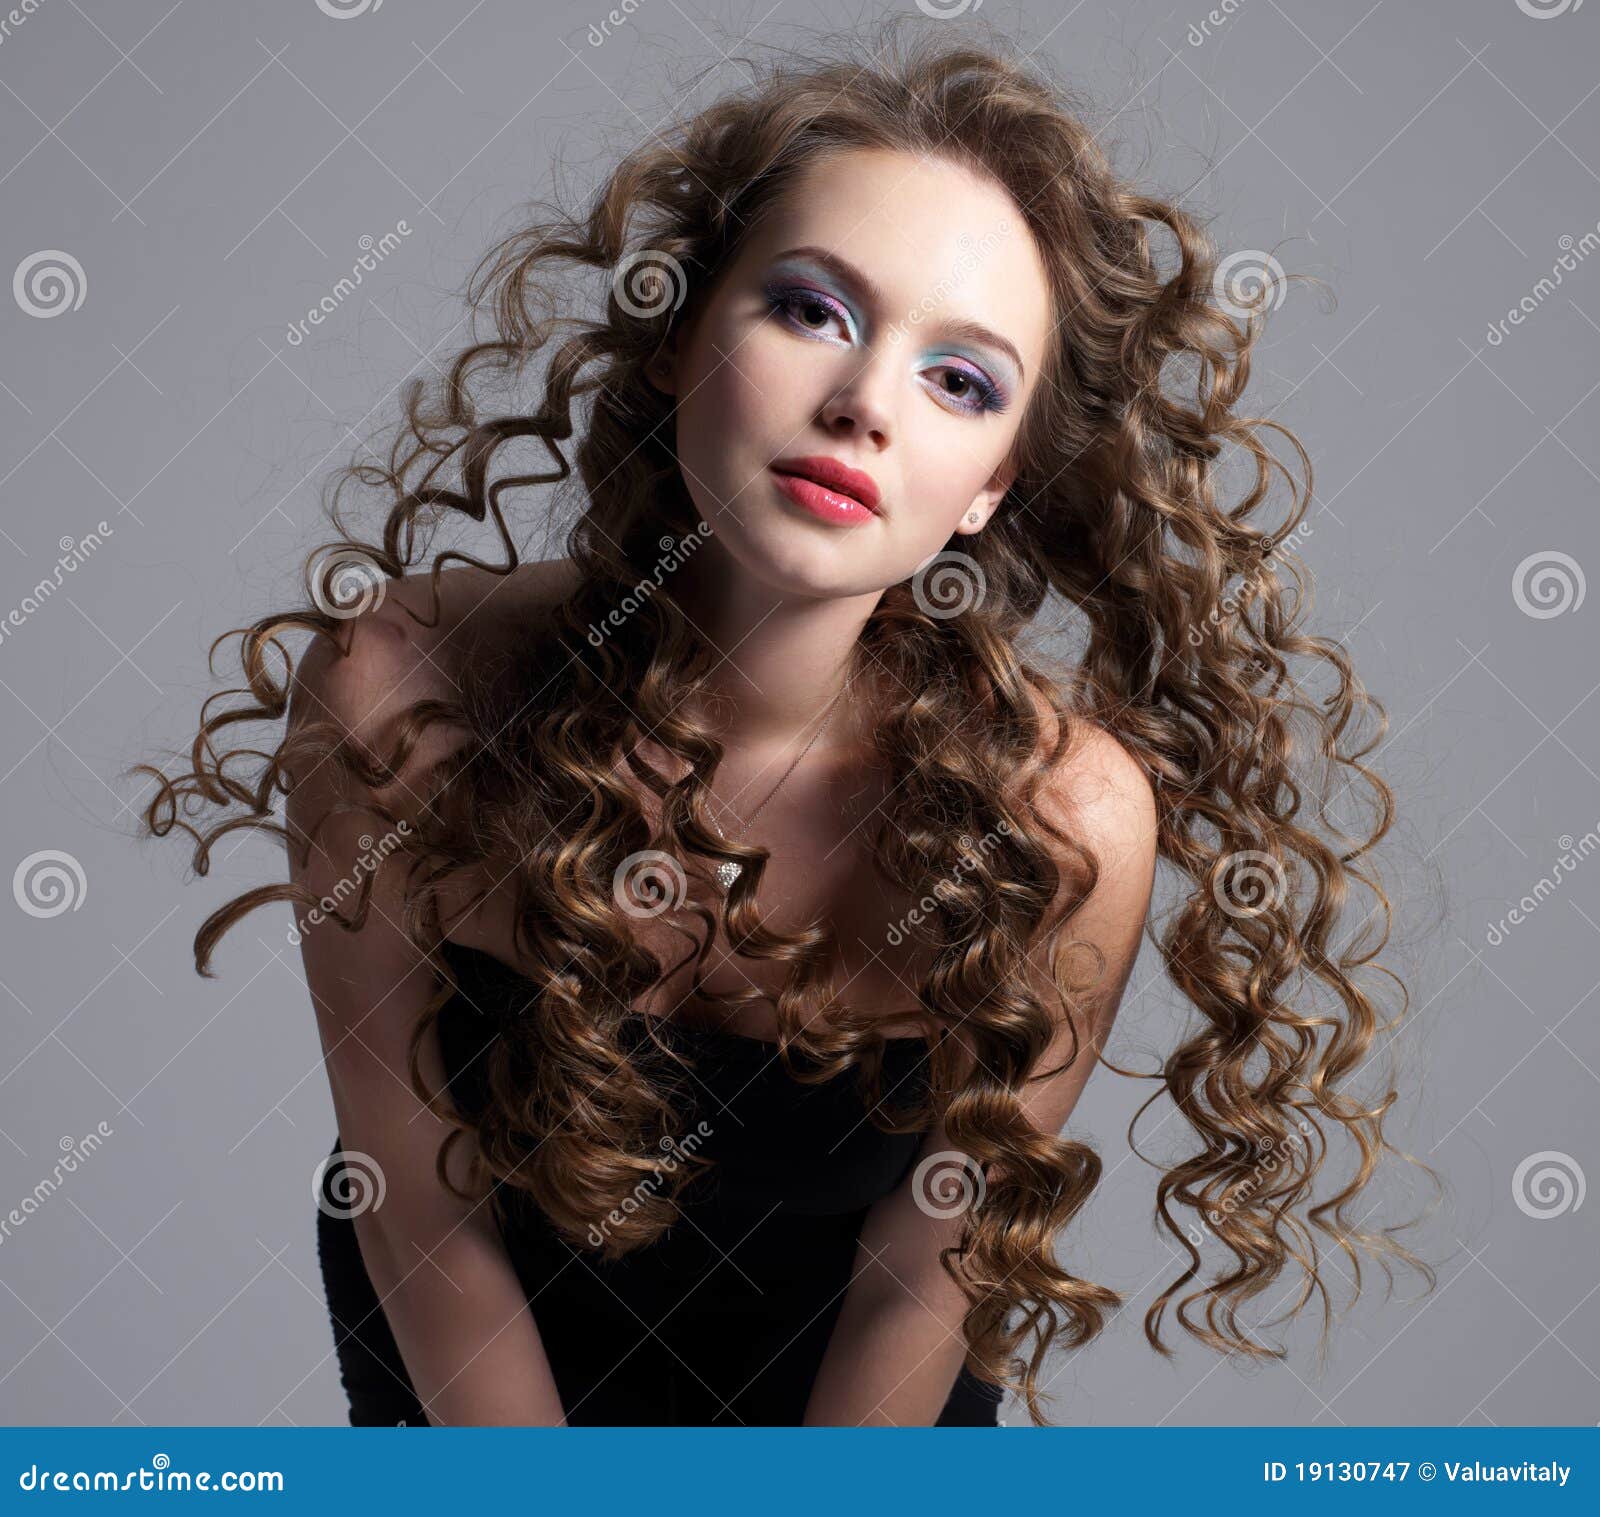 Glamour Face Of Teen Girl With Long Curly Hair Stock Image Image Of Young Beautiful 19130747 